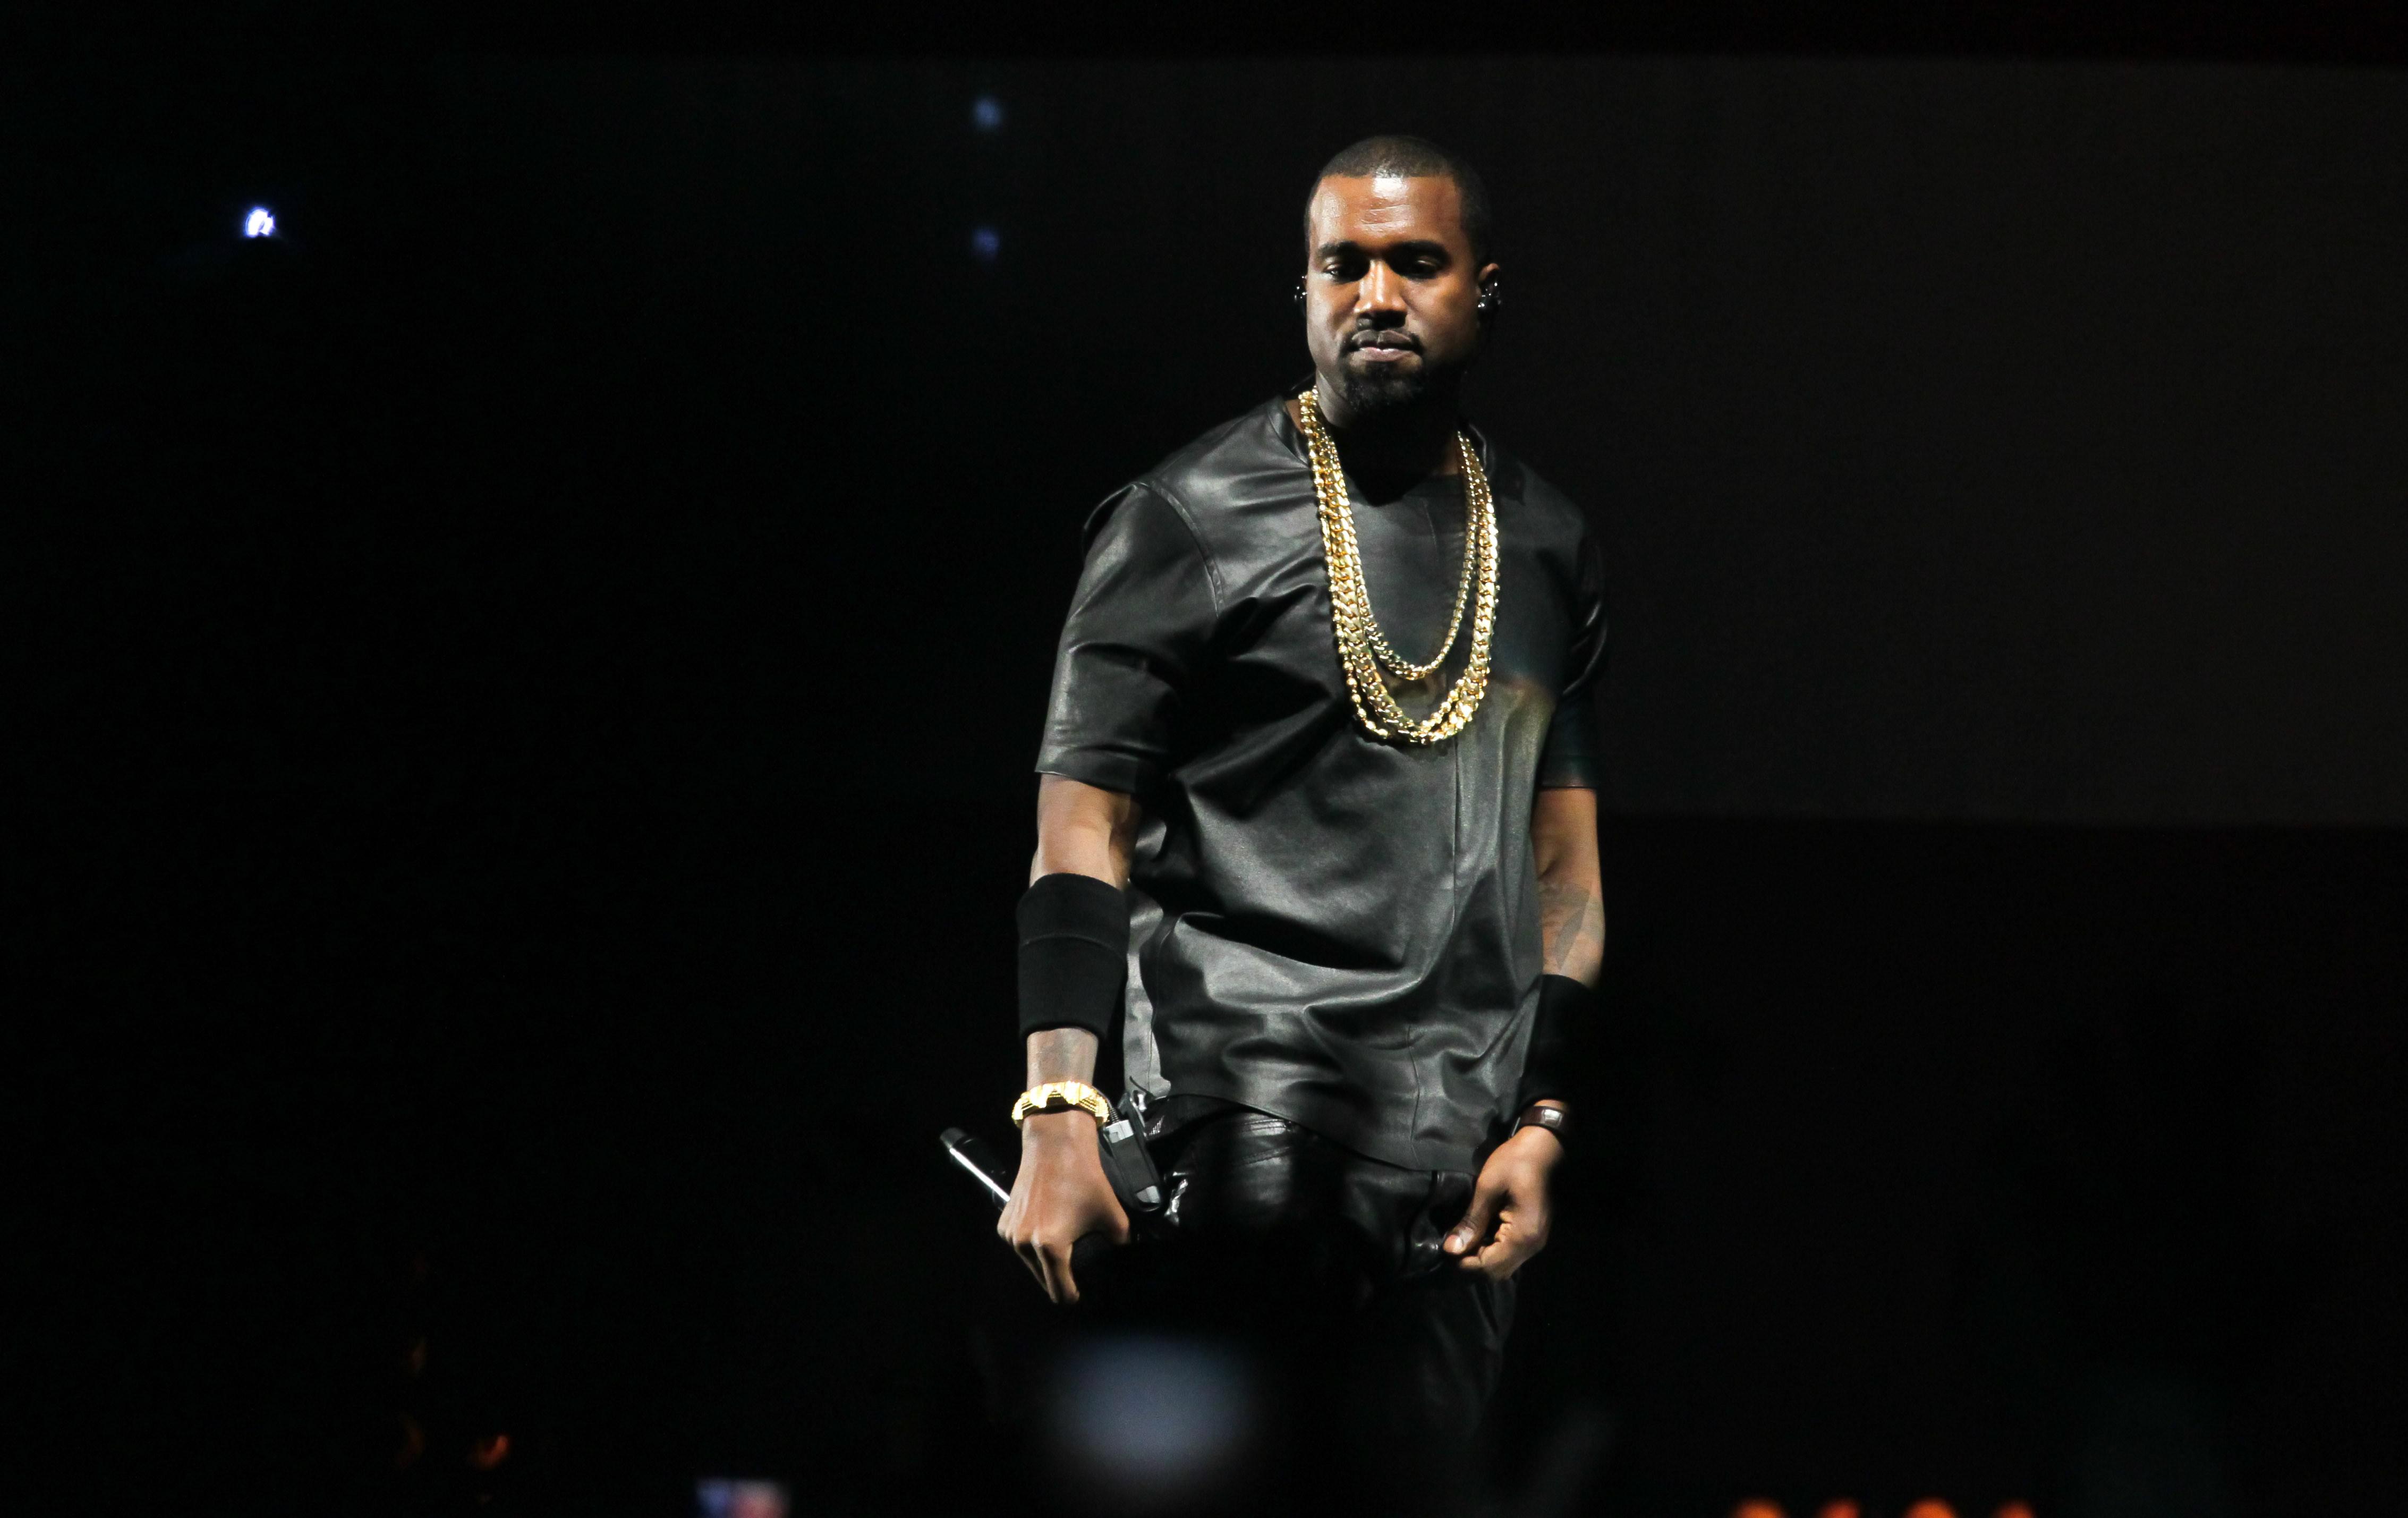 Kanye West Debuts New Song 'All Day' At BRIT Awards